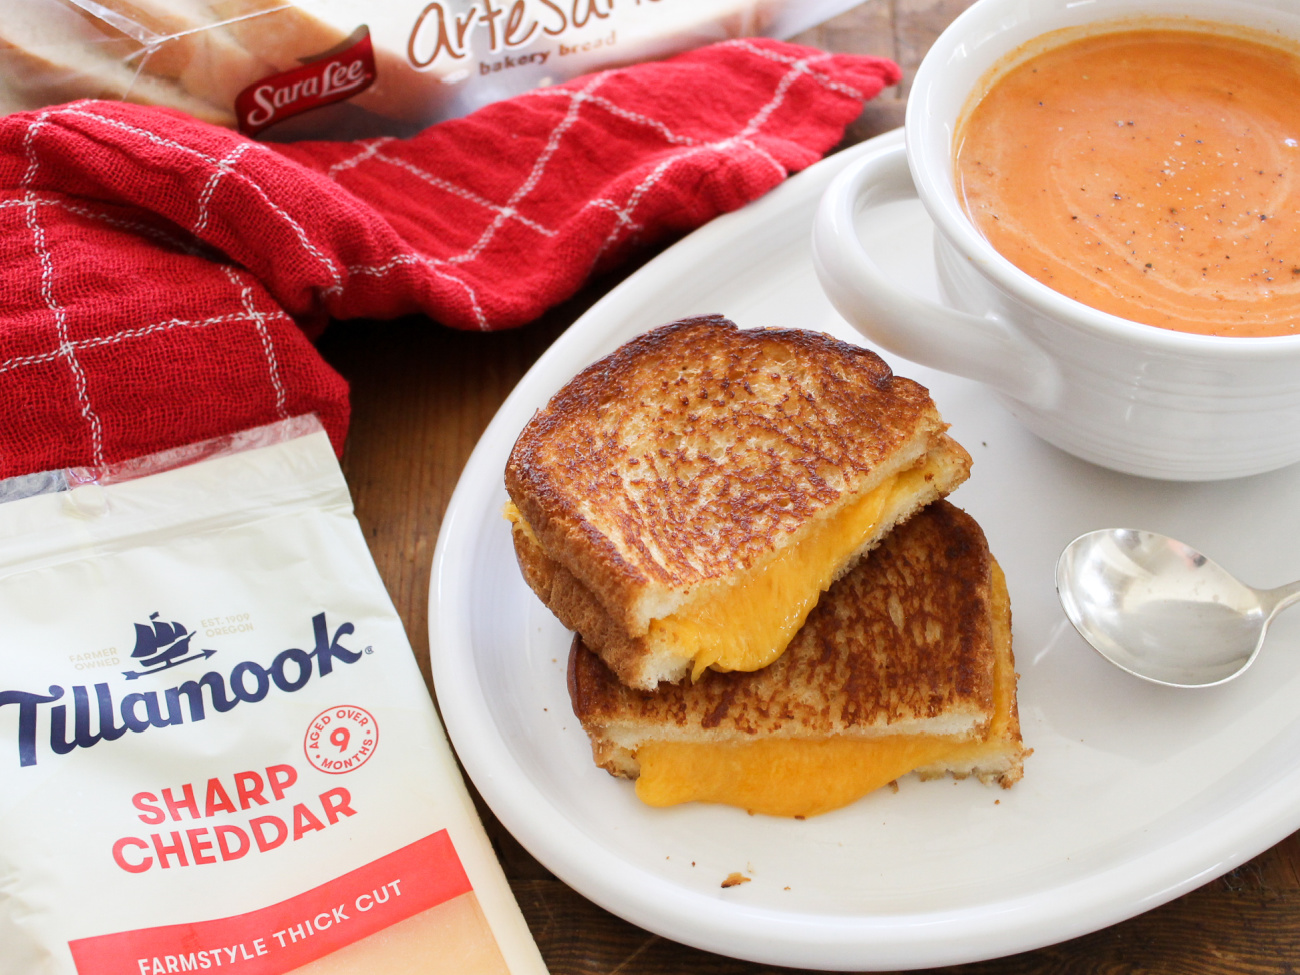 Don't Miss Your Chance To Save On Delicious Tillamook Cheese & Upgrade Your Grilled Cheese on I Heart Publix 1